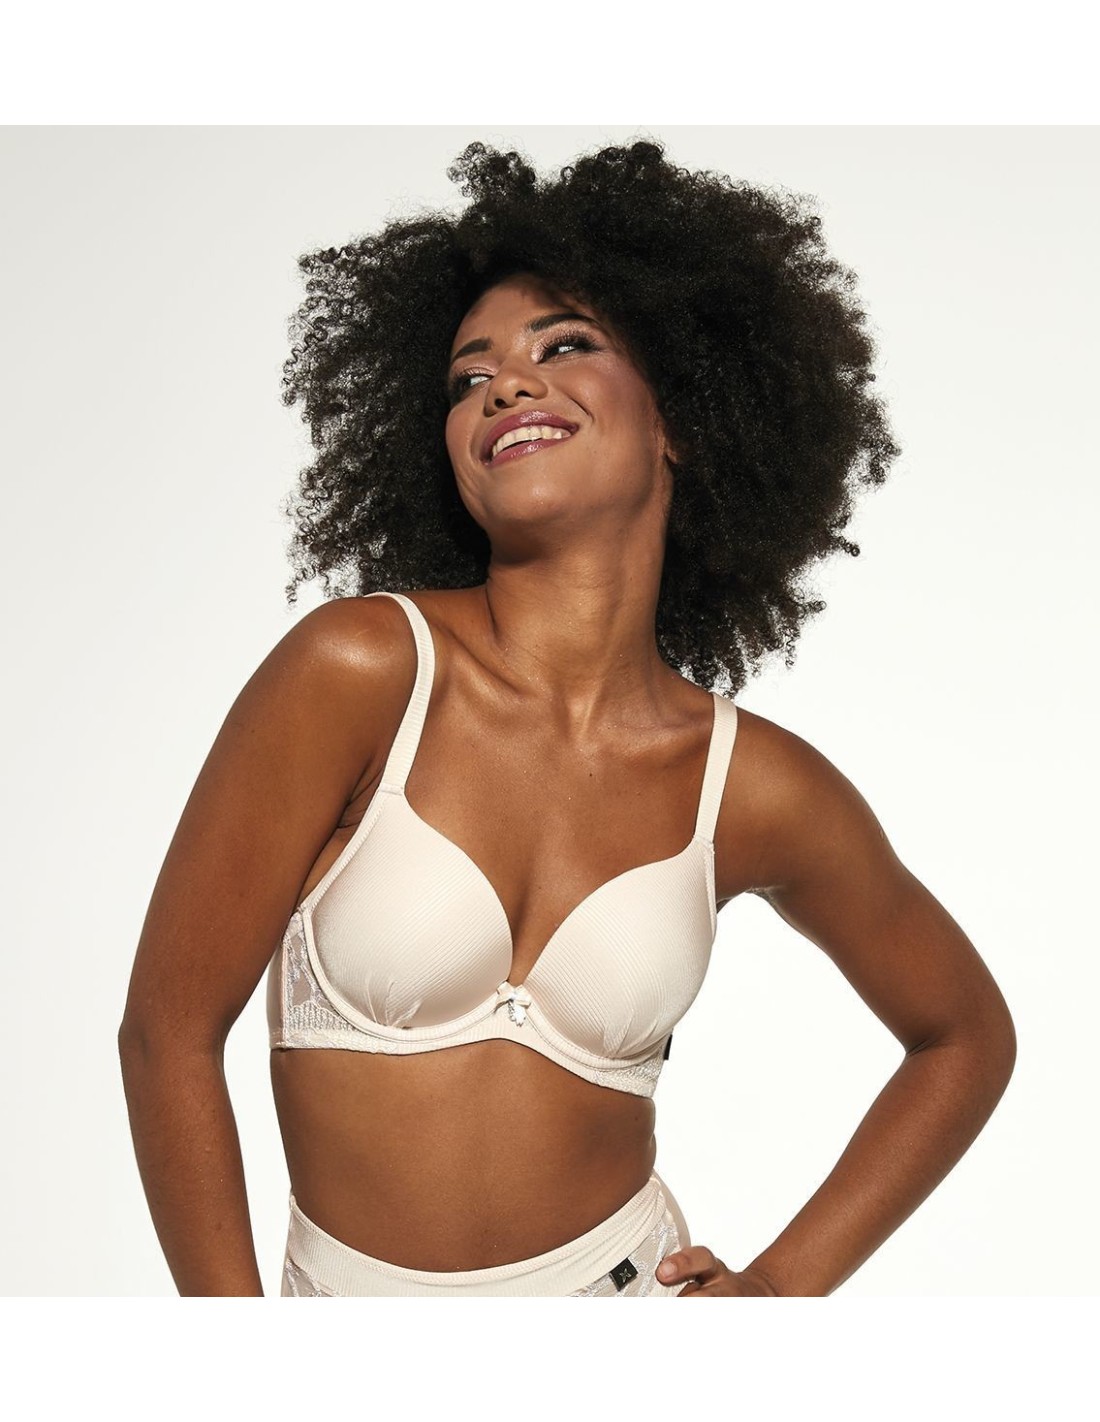 Inexpensive bras that actually fit small boobs? : r/TwoXChromosomes